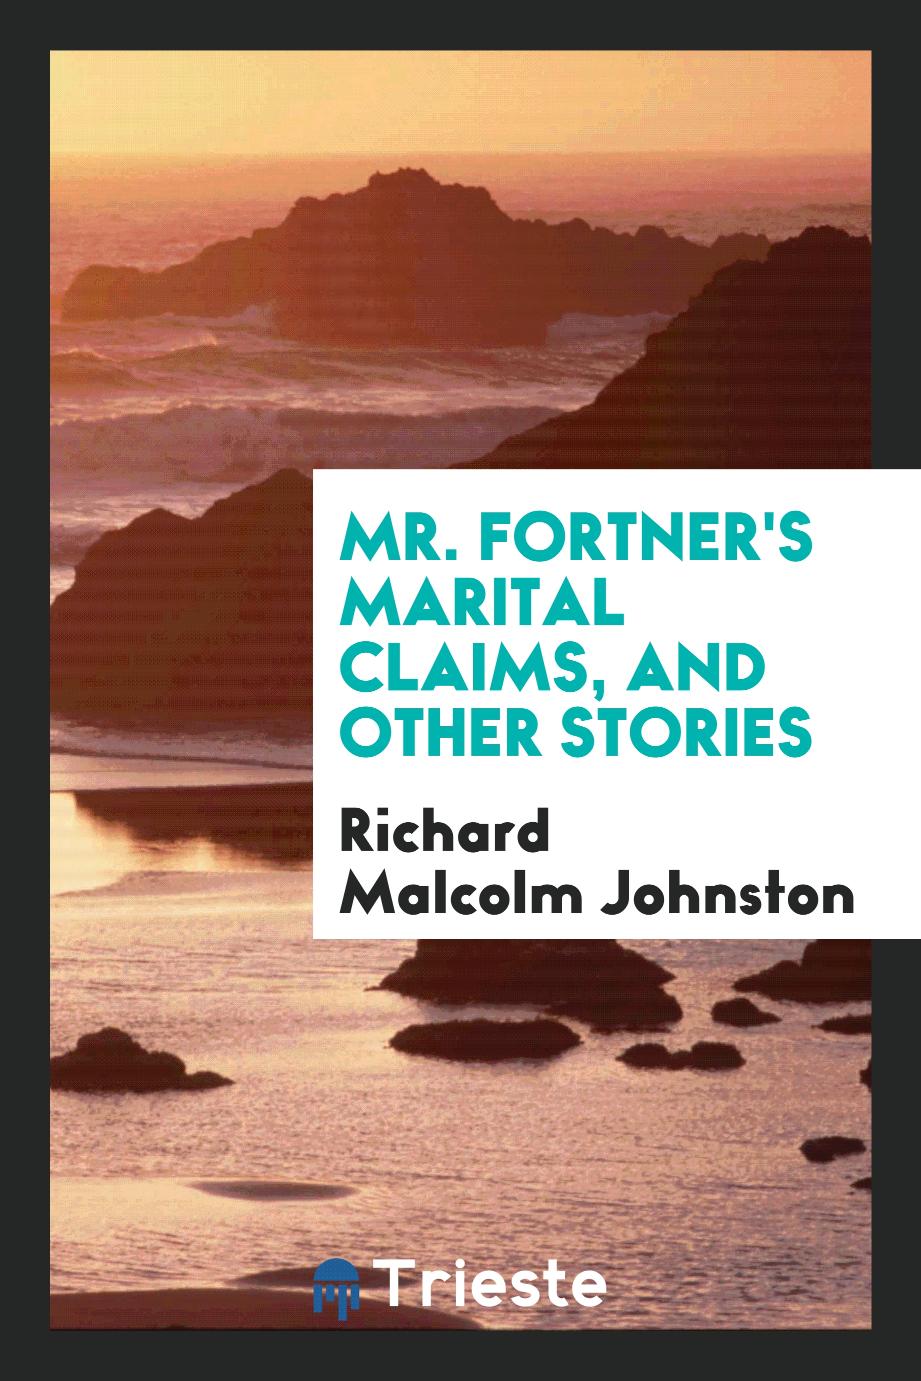 Mr. Fortner's marital claims, and other stories